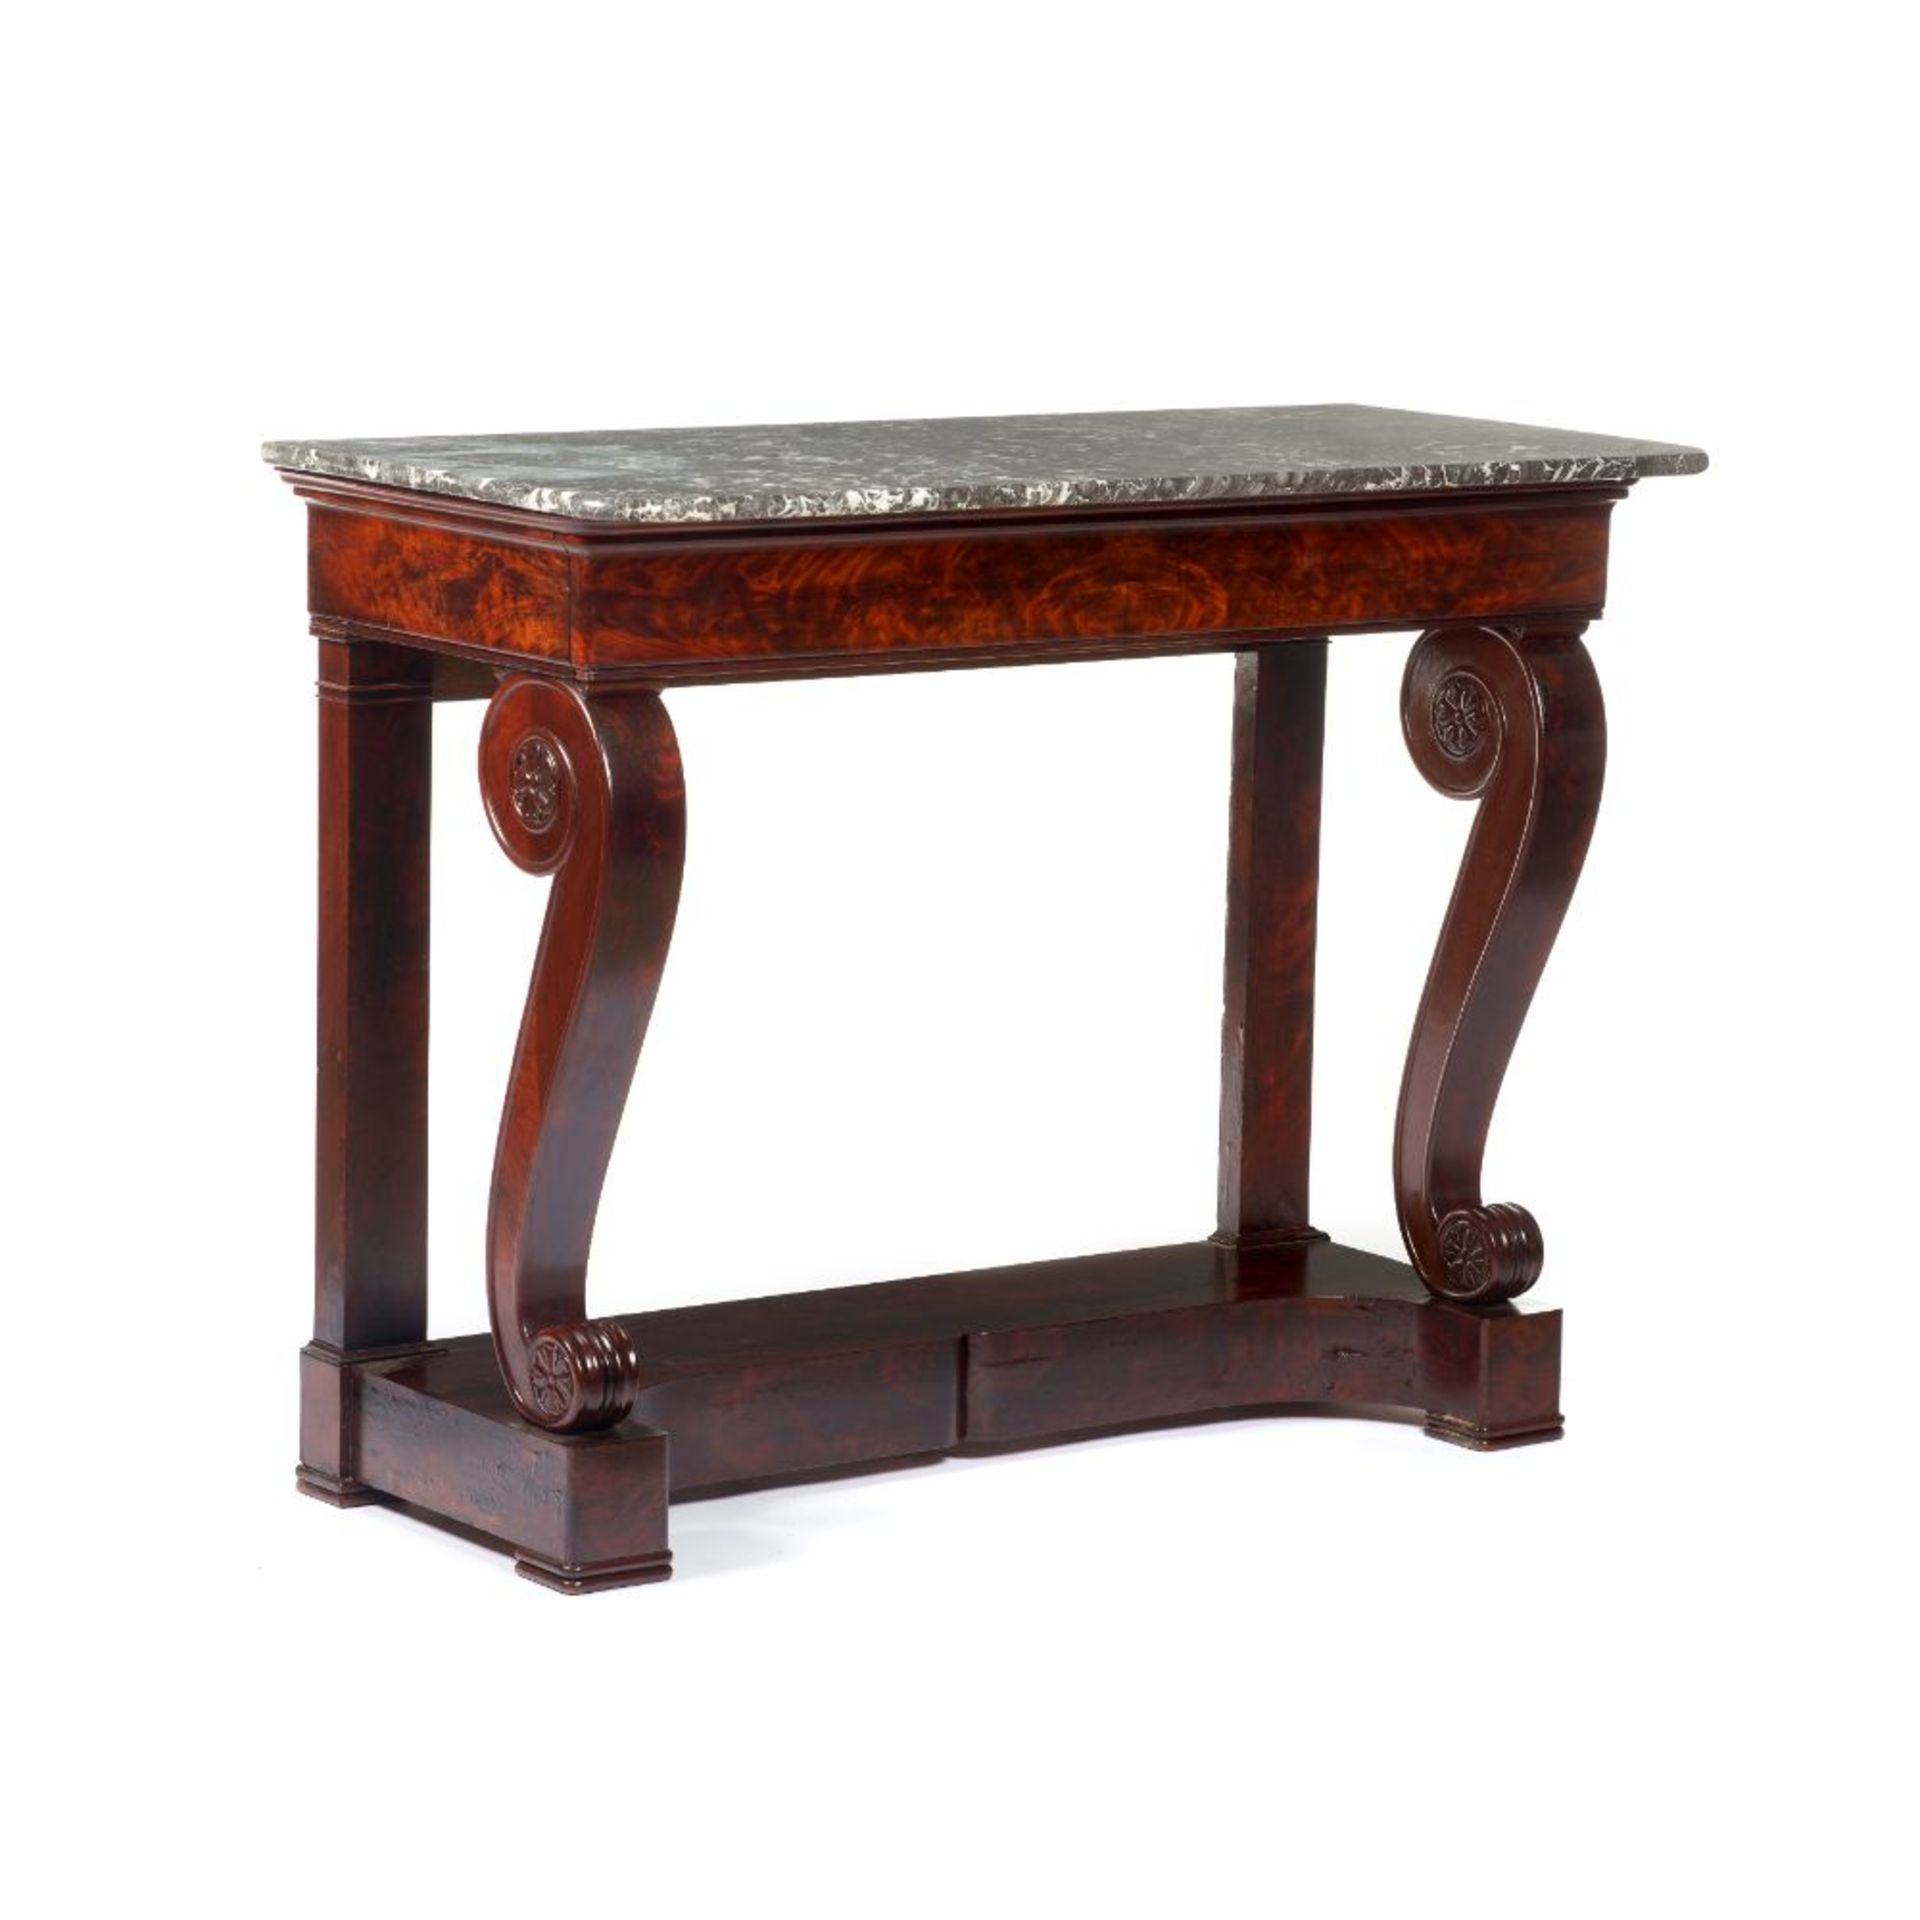 A pair of Louis-Philippe consoles, Solid and veneered mahogany, Cabriole front legs, carved